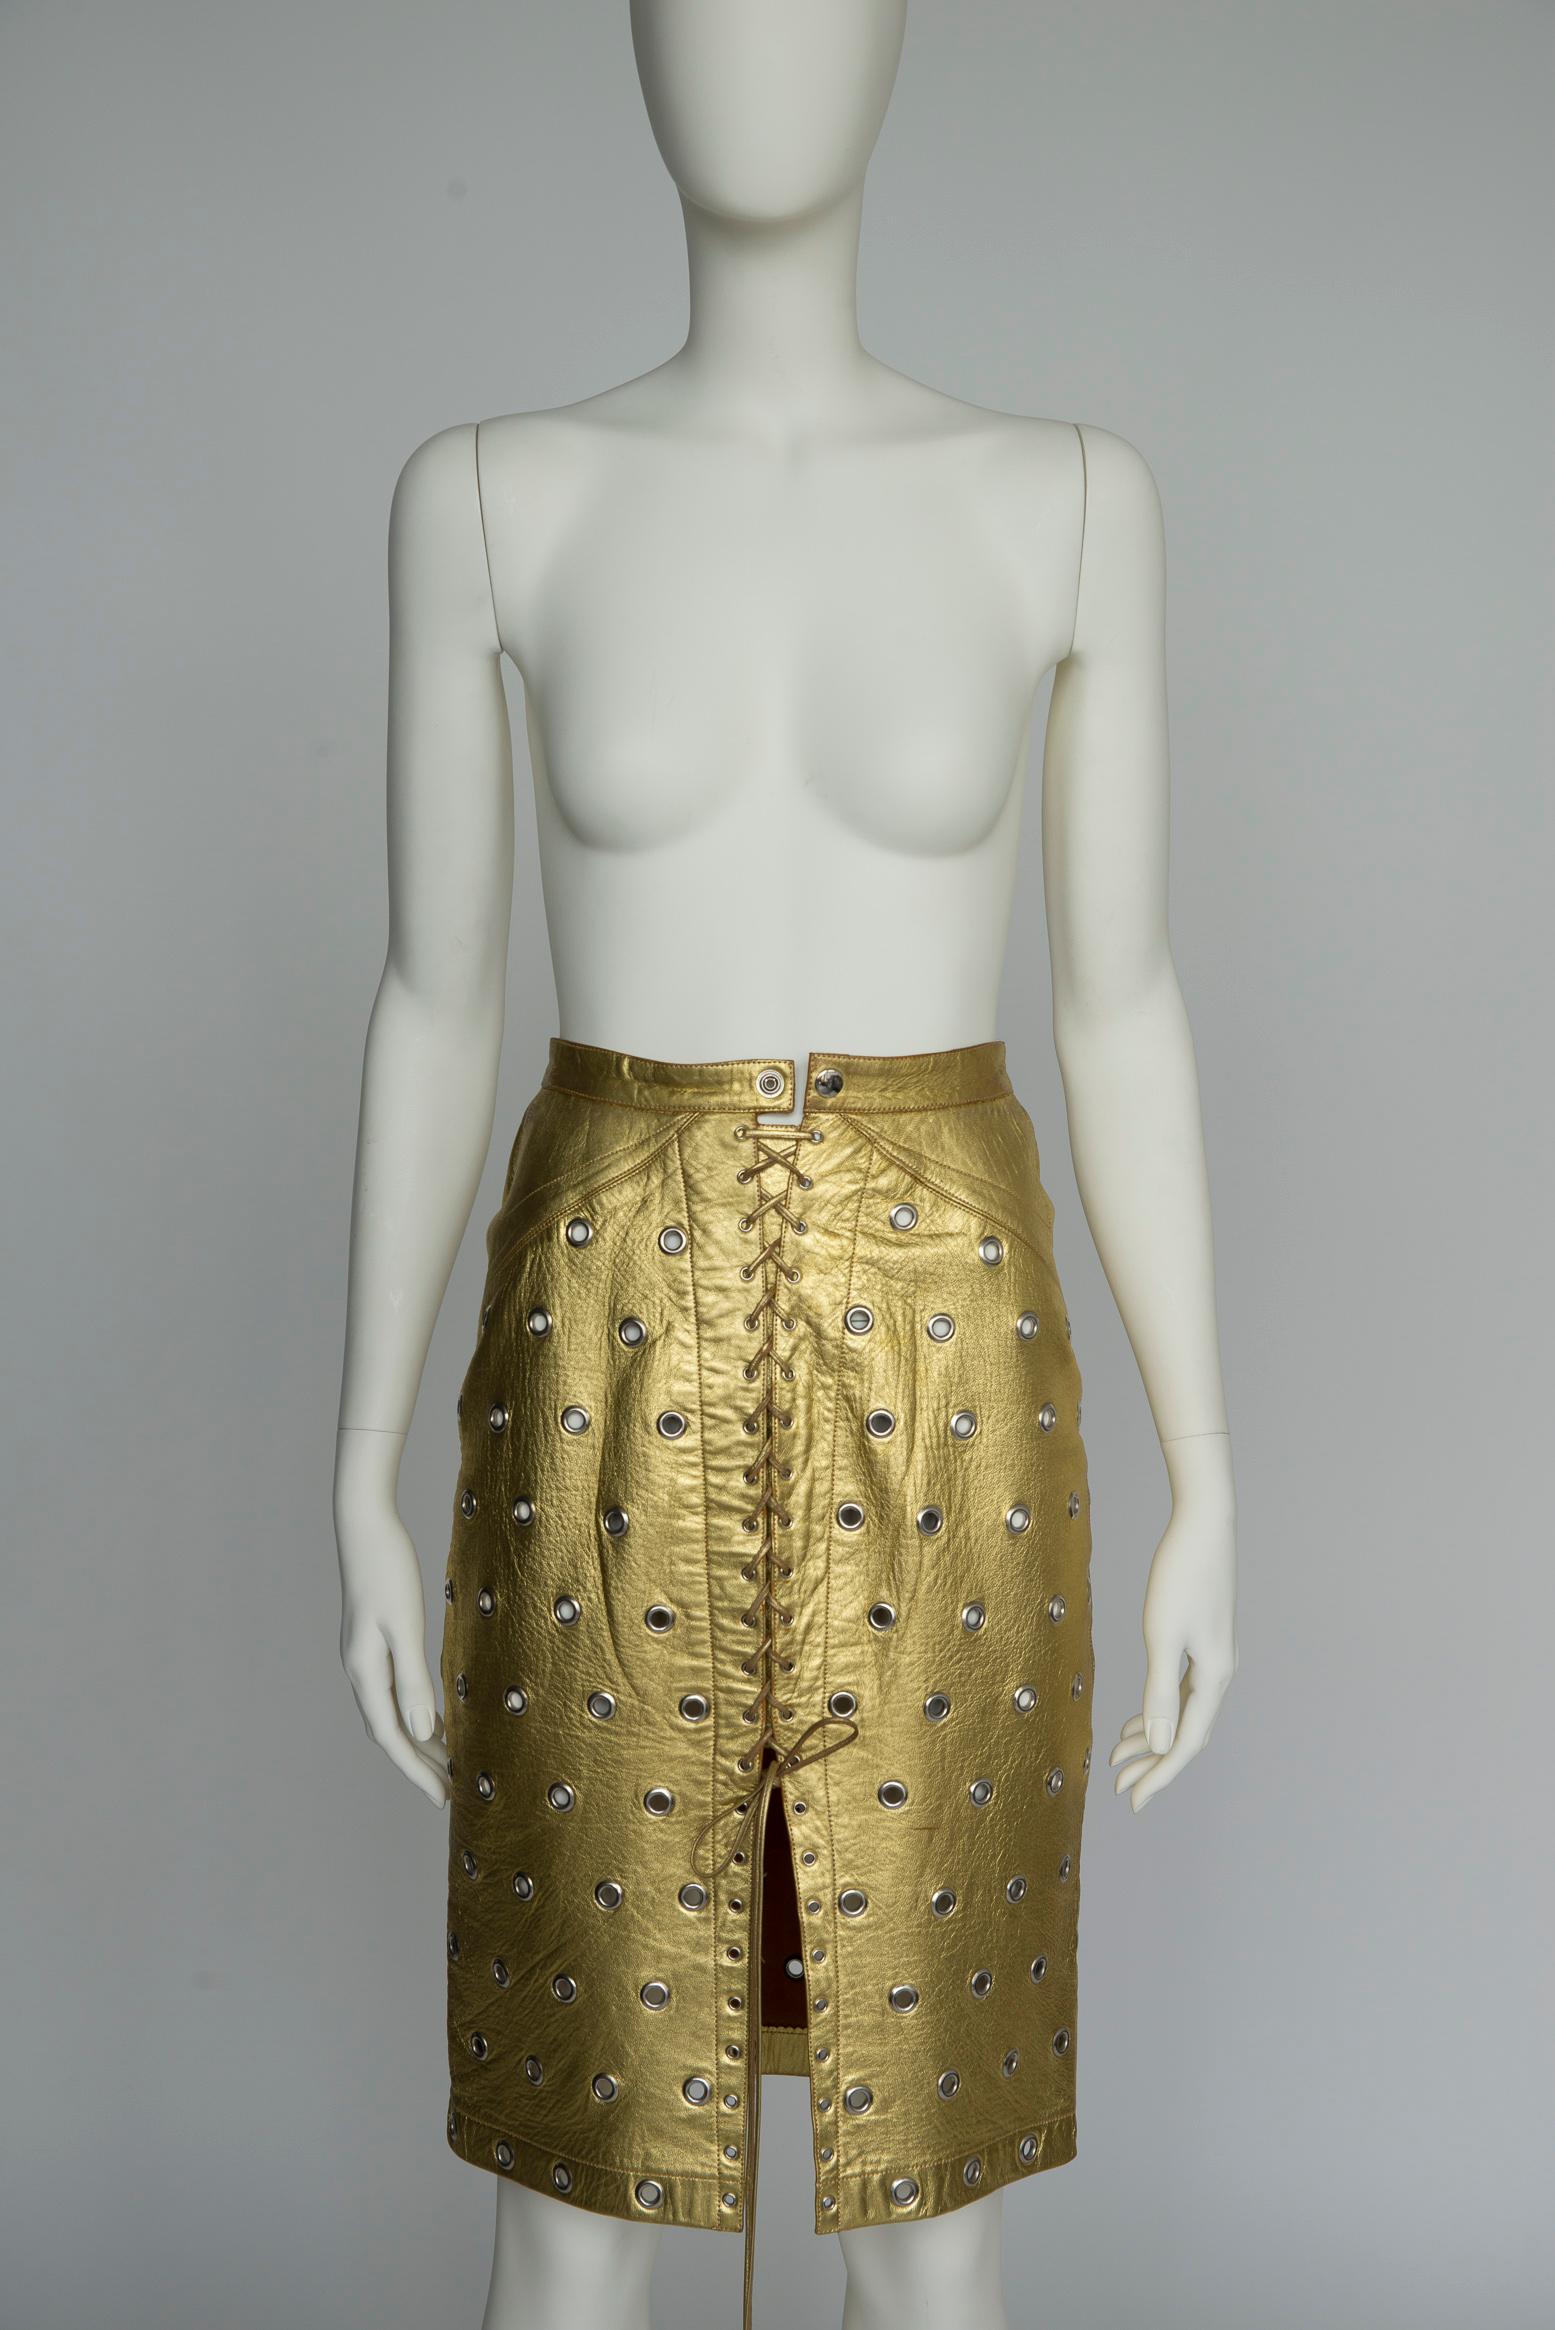 Worldwide known, admired and revered for his intuitive comprehension of the female body, Azzedine Alaïa never ceased to highlight women. Crafted from supple gold leather with his signature eyelet embellishments, this rare 80s skirt (probably from